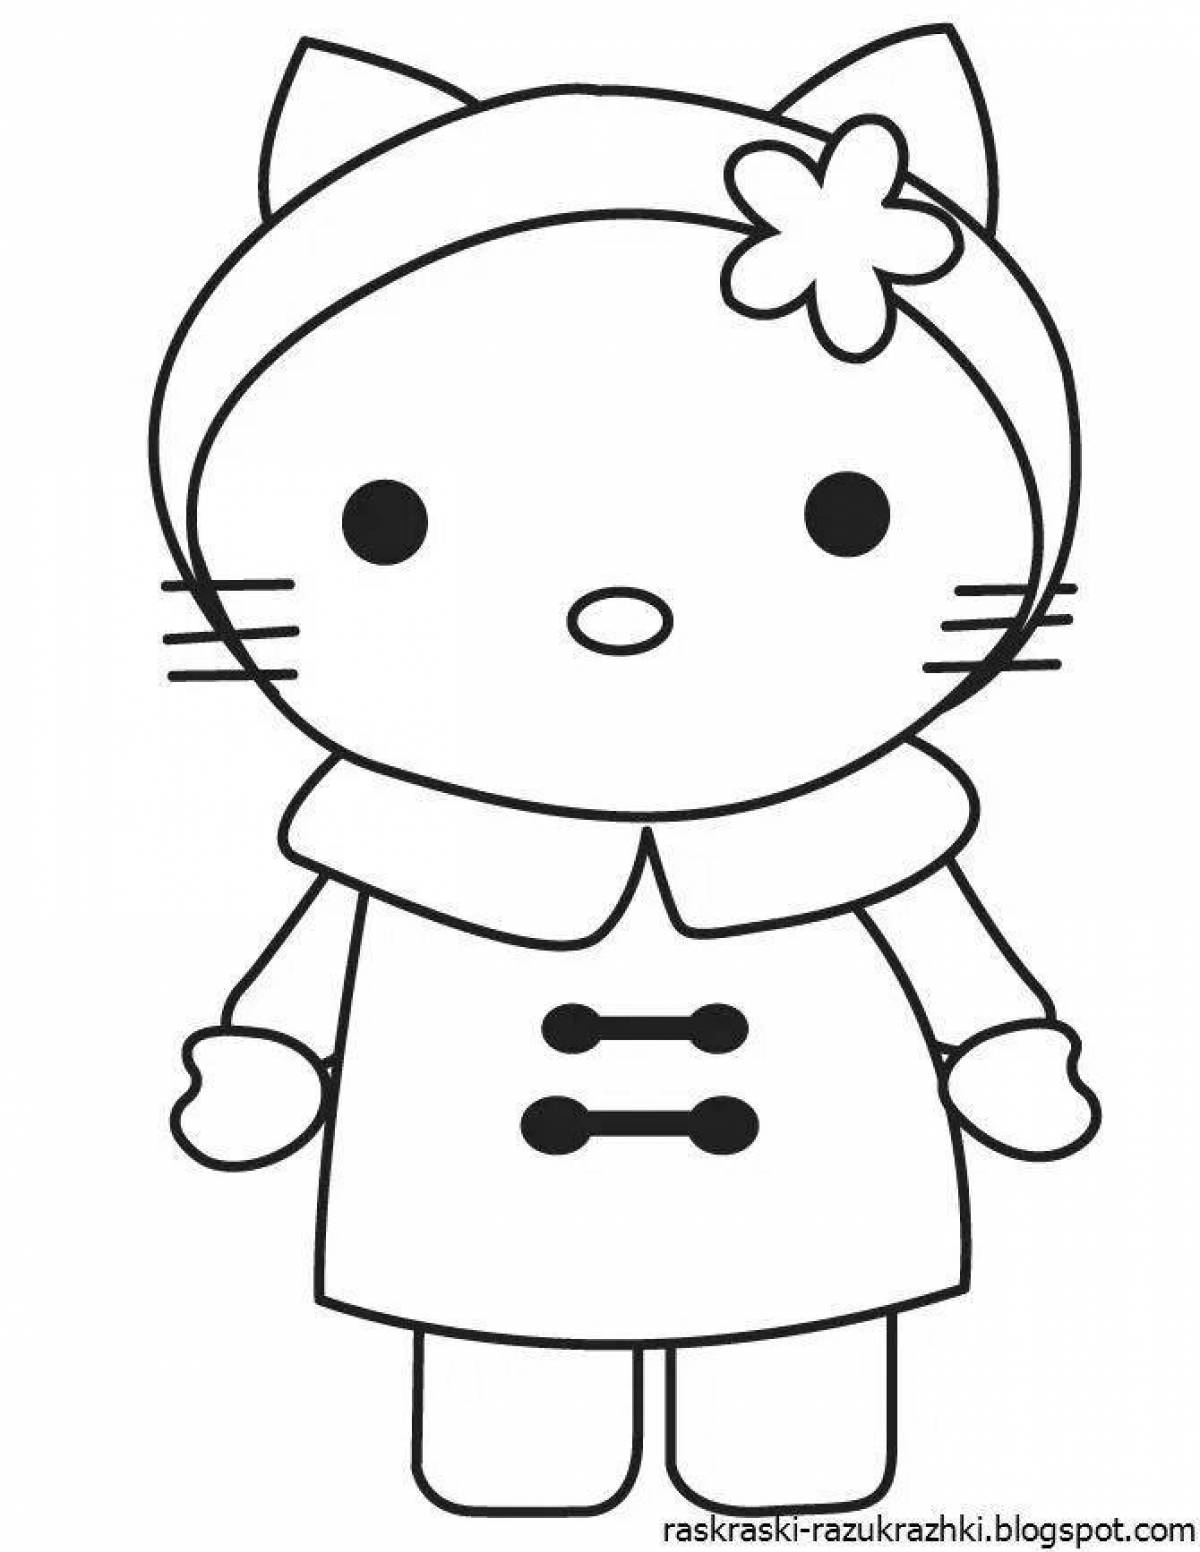 Shiny hello kitty coloring book with clothes